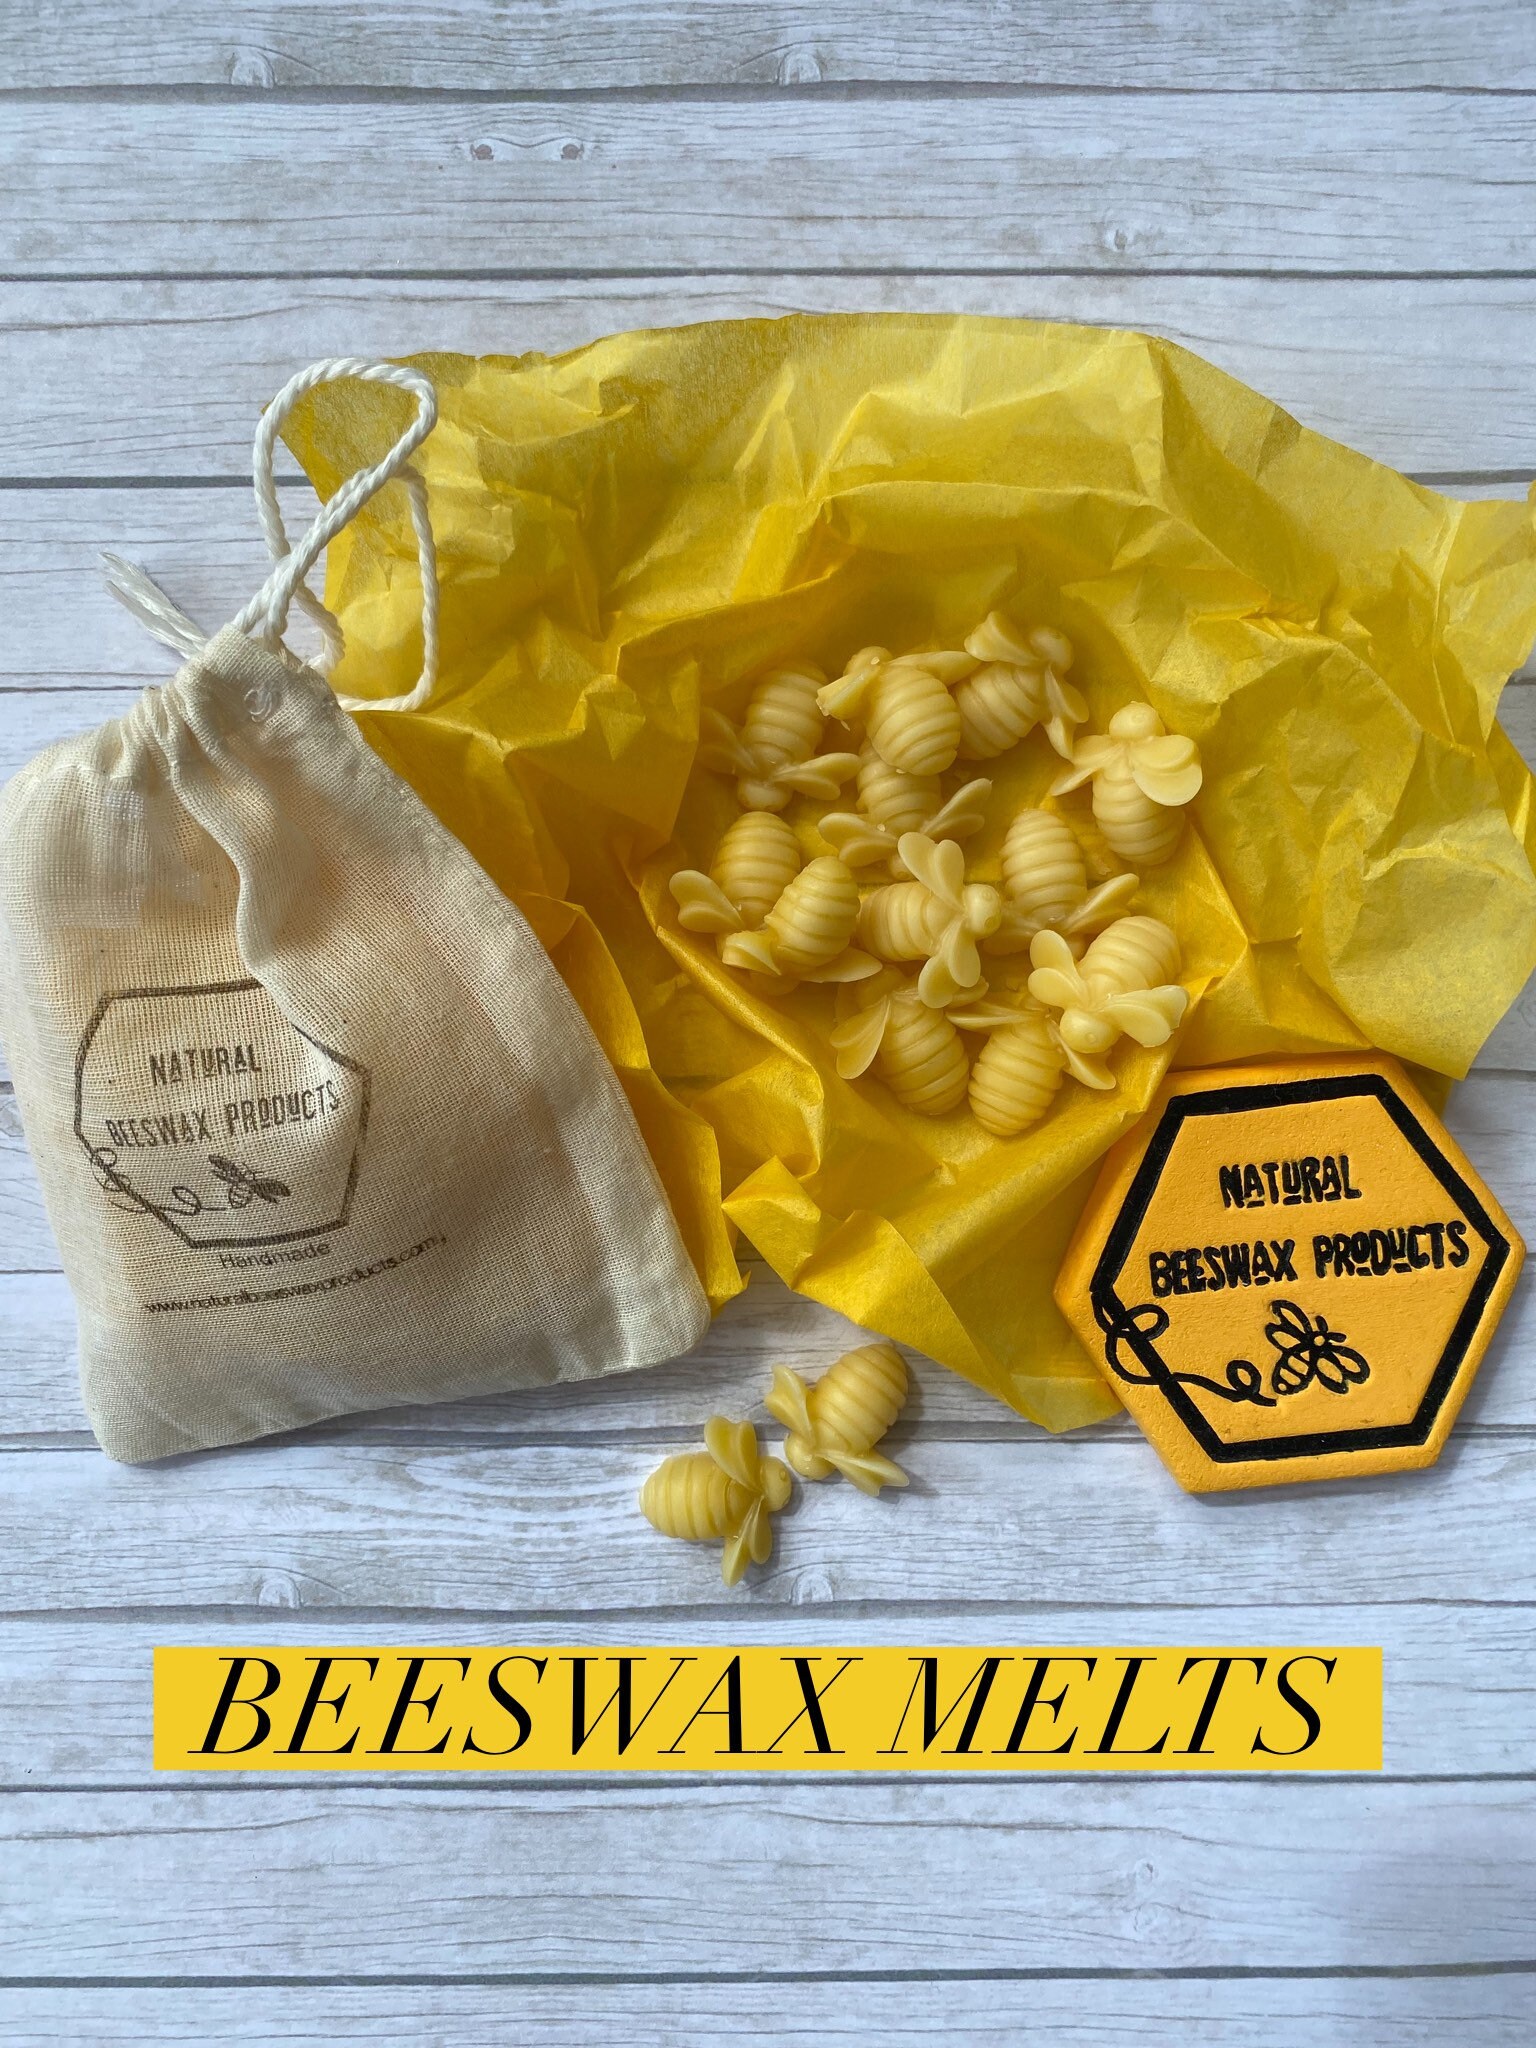 Pure organic Beeswax melts made with local Georgia beeswax in a variety of  scents-natural scents-holiday scents-holiday scented beeswax melt